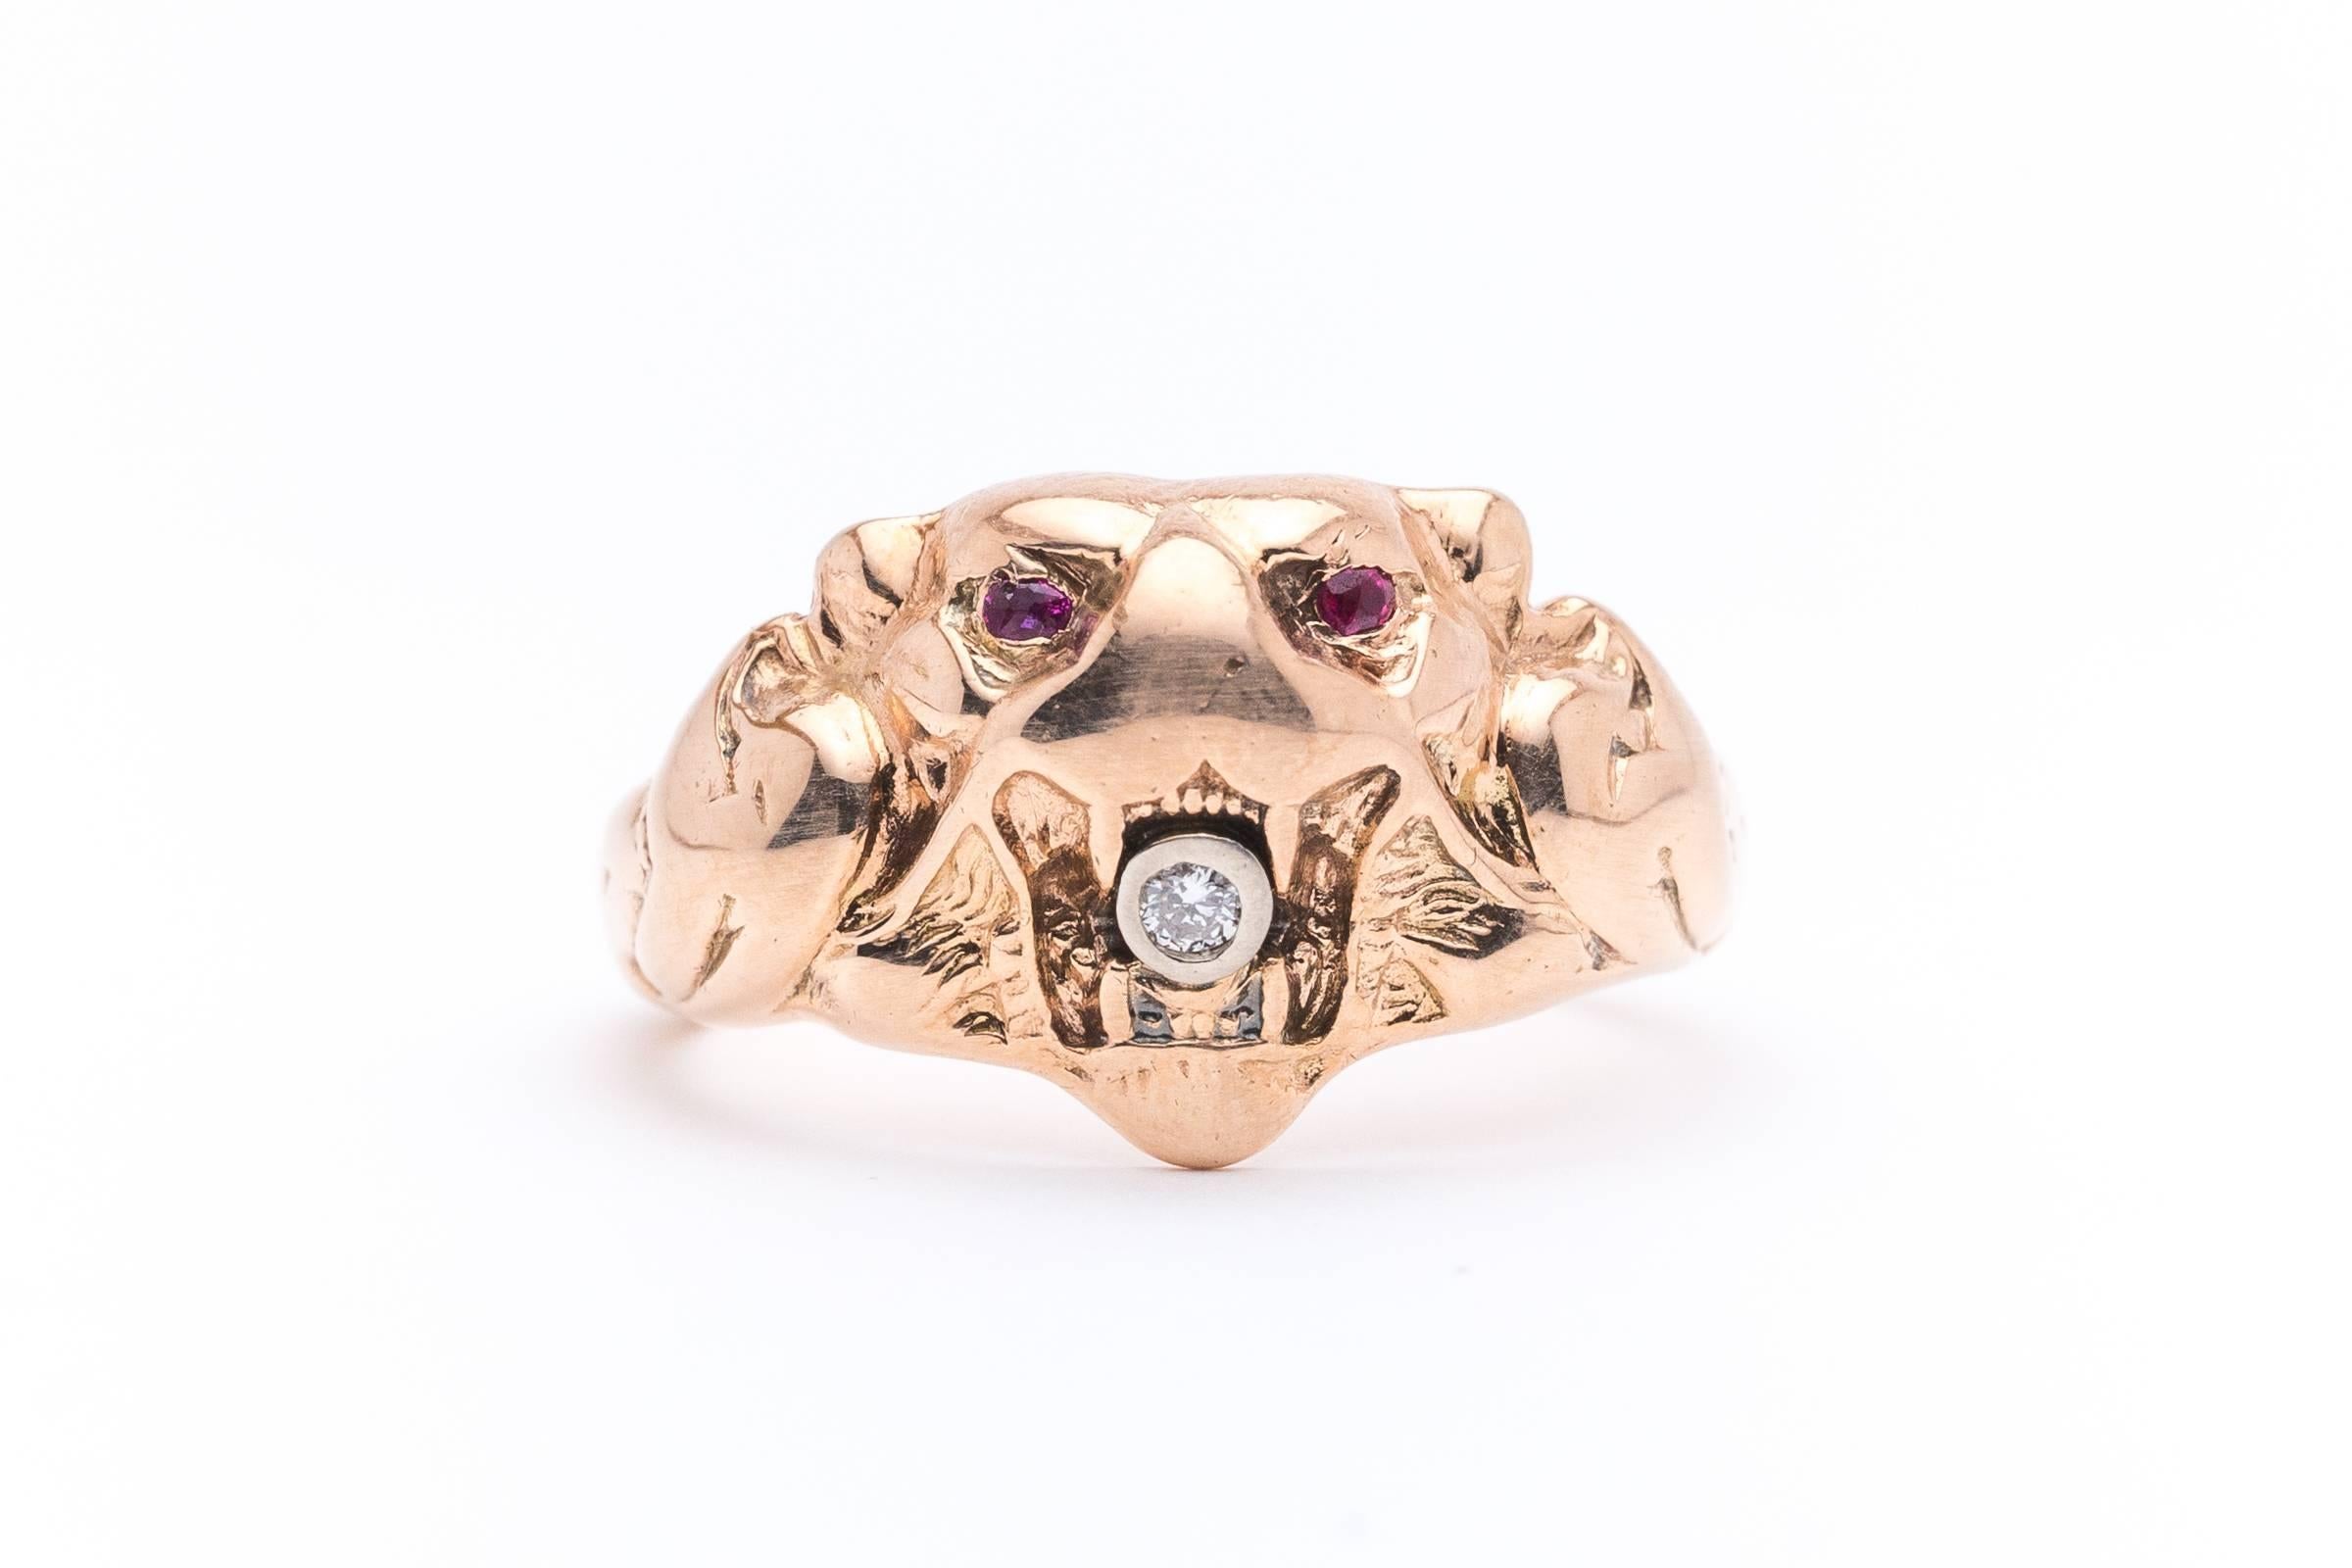 
Beacon Hill Jewelers Presents:

An antique hand crafted carved mens lion ring in 14 karat rose gold. Intense in it's appearance, the lion features a diamond mouth and piercing ruby eyes which add to the intensity of the piece.

Beautifully